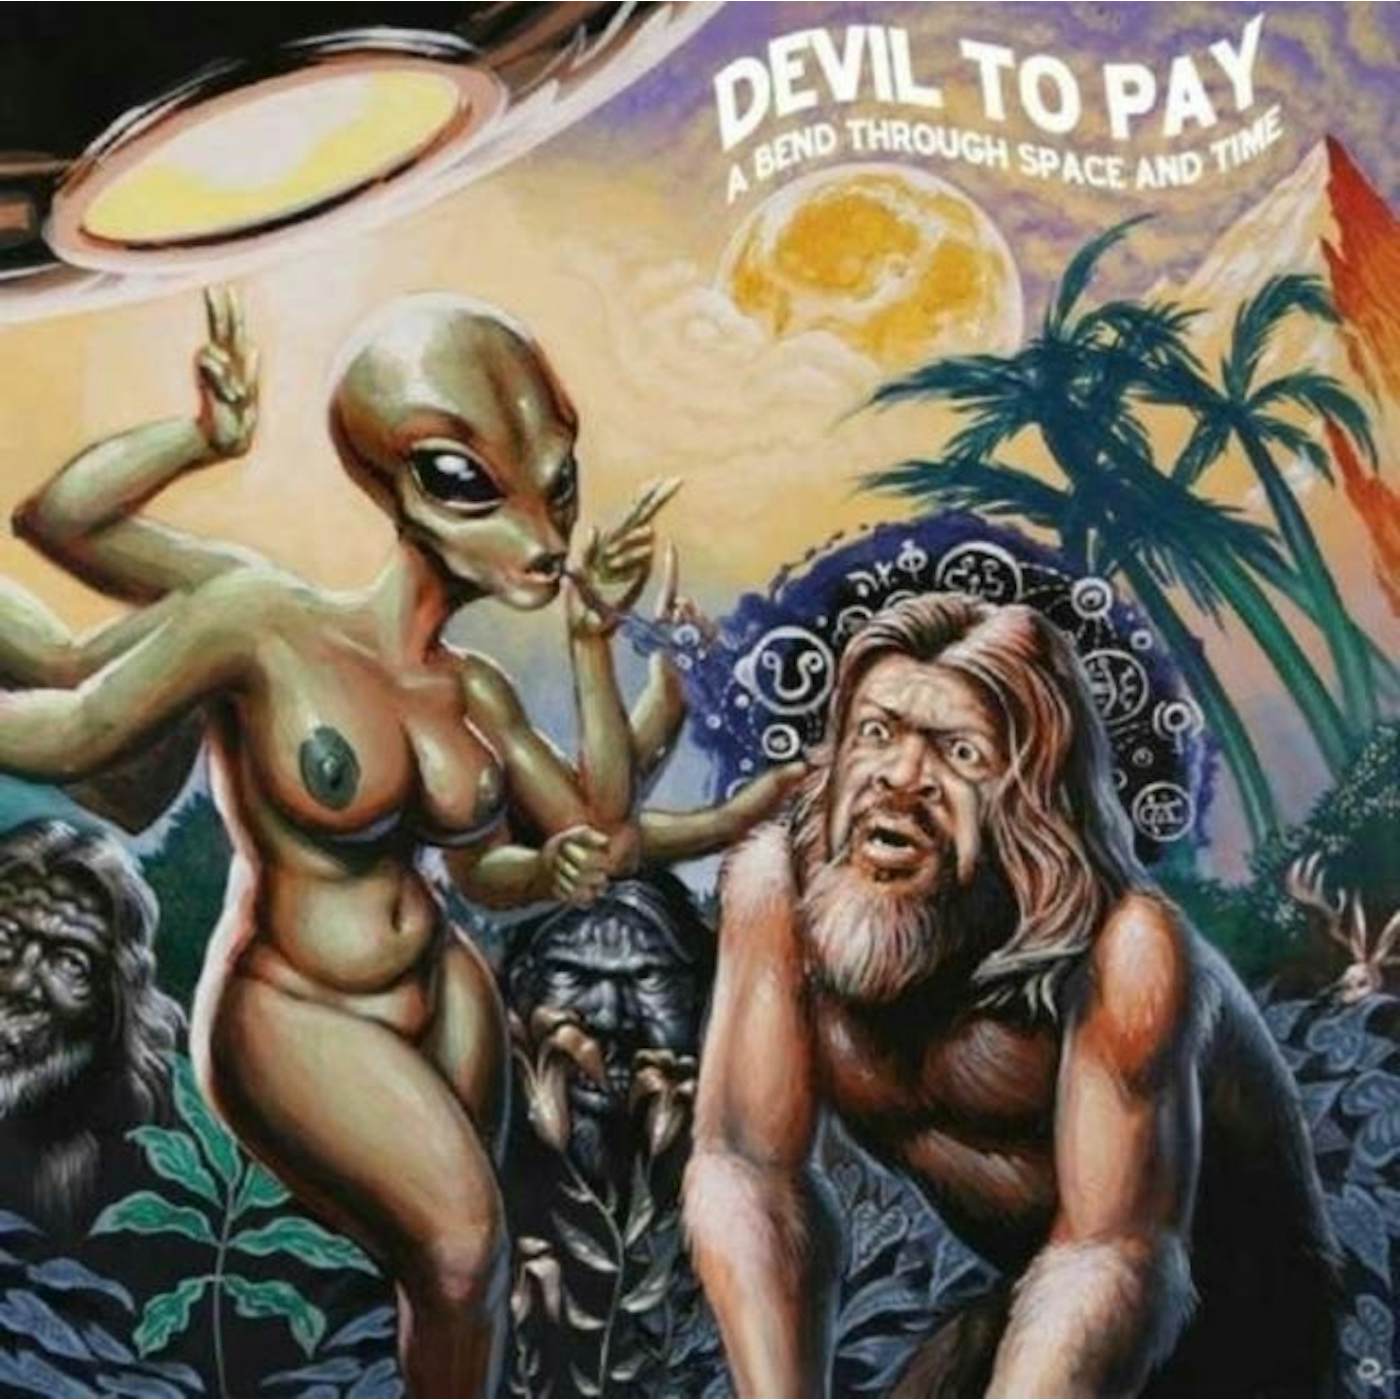 Devil To Pay CD - A Bend Through Space And Time